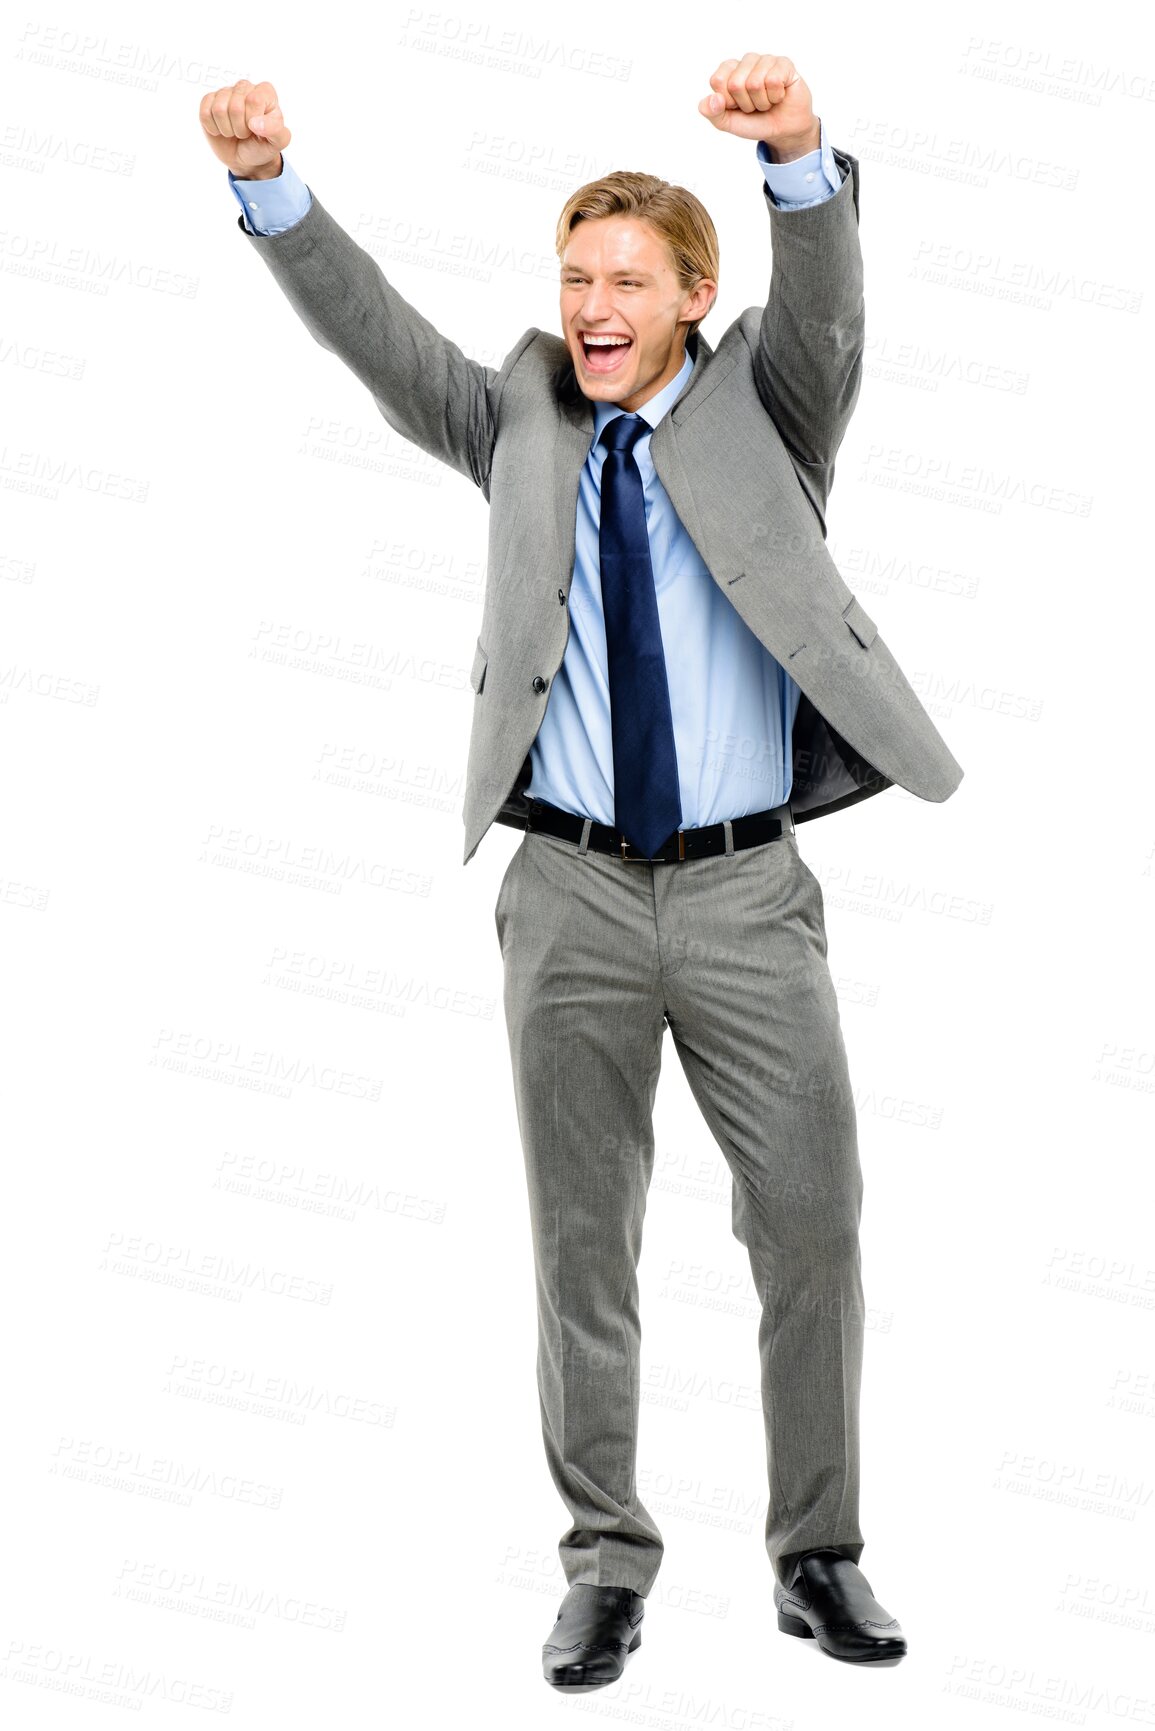 Buy stock photo Happy, celebration and a businessman with professional success, corporate and trading win. Smile, work and excited man in a suit for celebration of achievement isolated on transparent png background